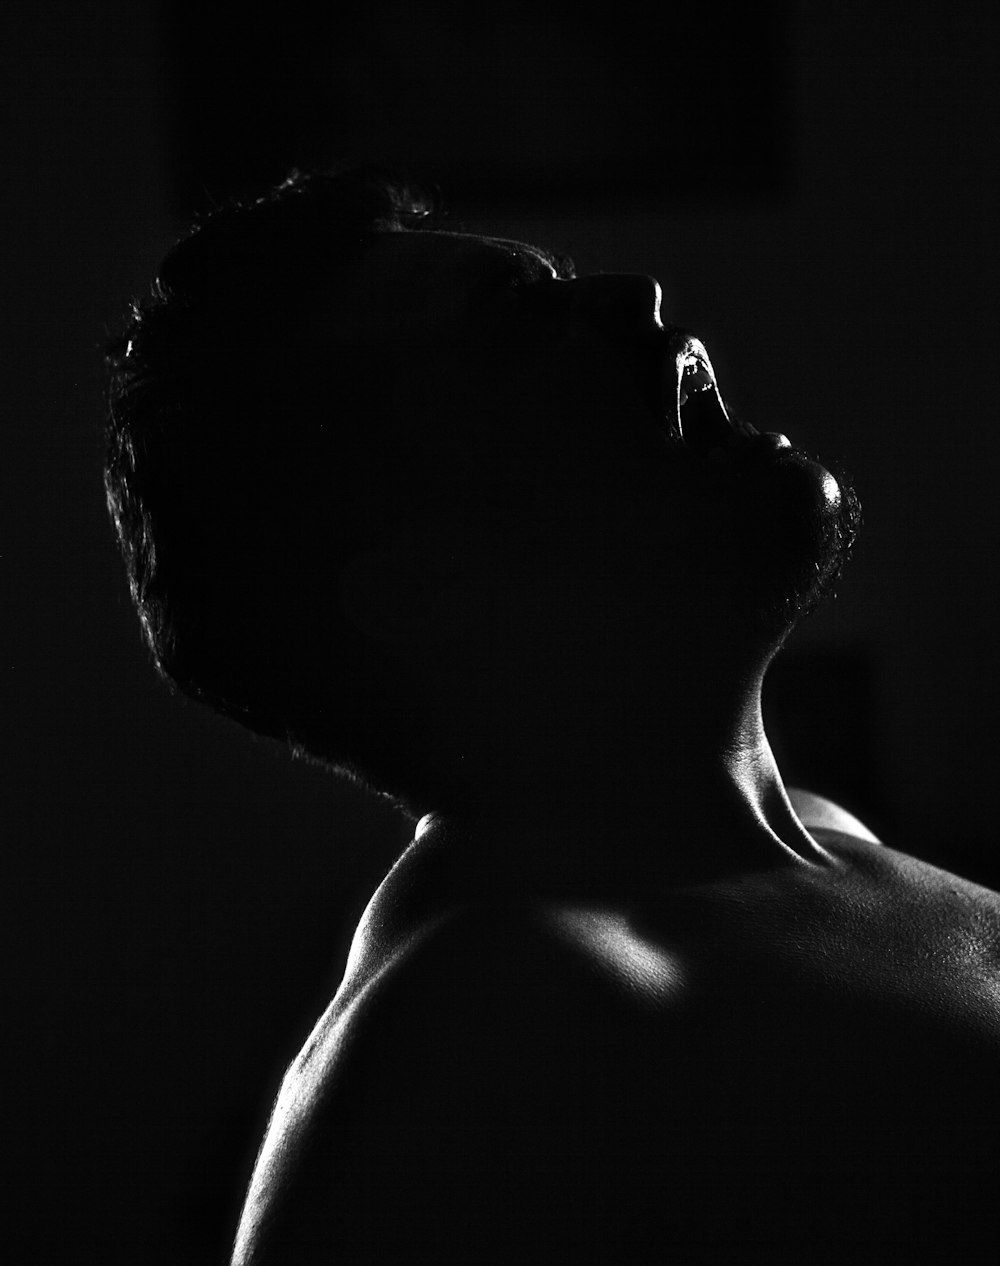 grayscale photo of topless man